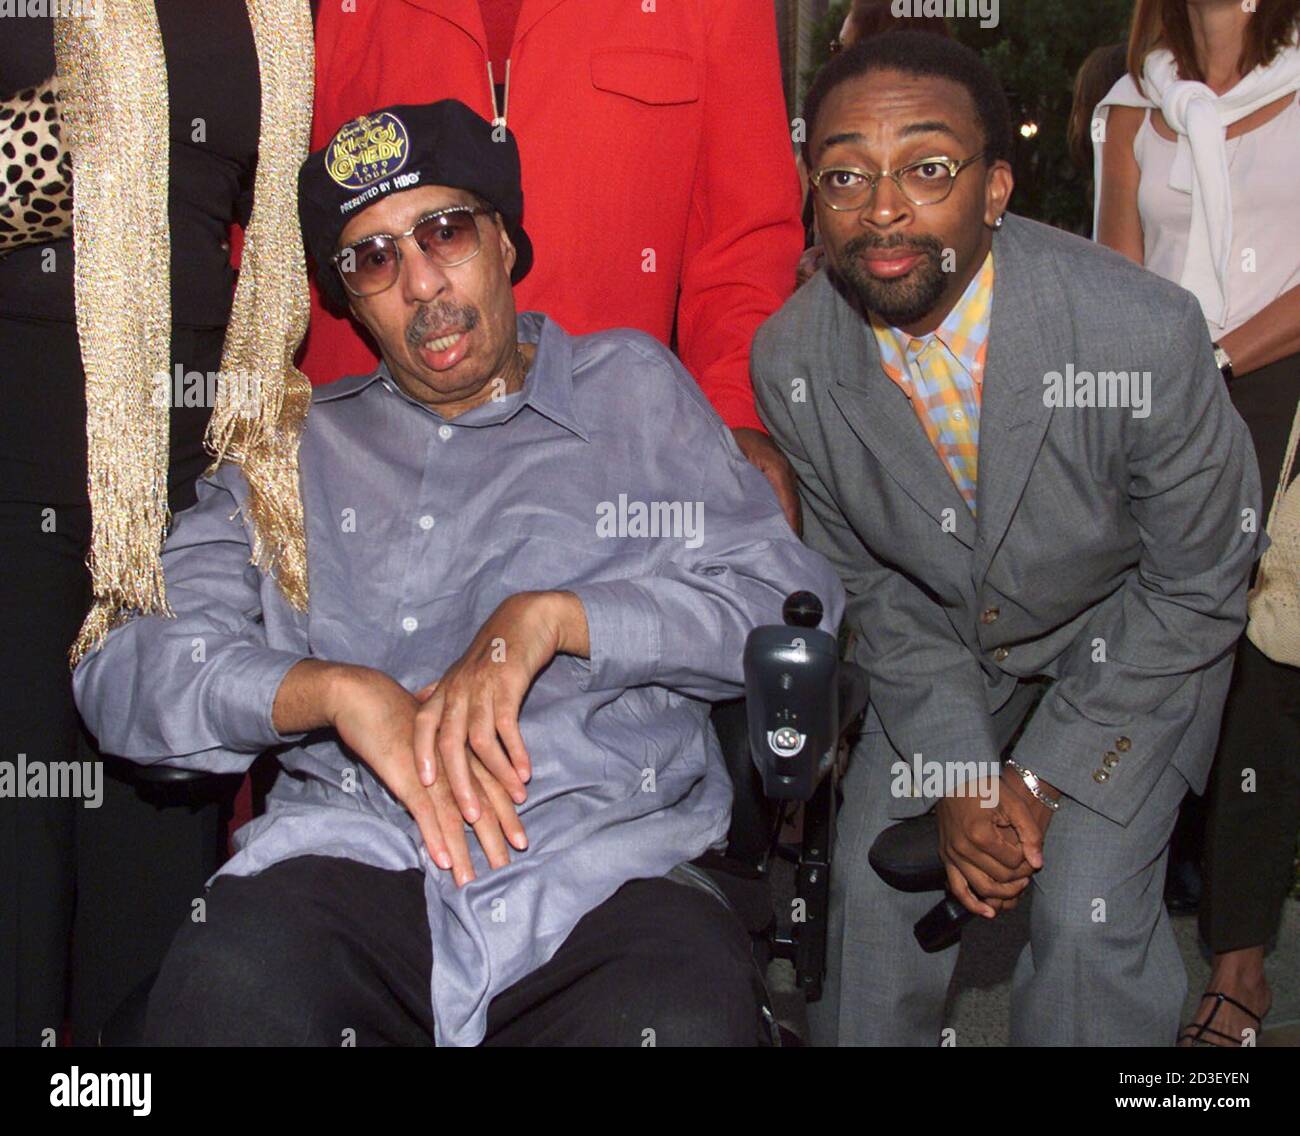 Comedian Richard Pryor poses with film director Spike Lee (R) at the premiere of Lee's new film, 'The Original Kings of Comedy,' on the Paramount Studios lot in Hollywood, August 10, 2000. Also this evening, Pryor, who suffers from multiple sclerosis, was honored with MTV Films' Lifetime Achievement Award for his contributions to the entertainment world. The film opens August 18 in the United States. Stock Photo